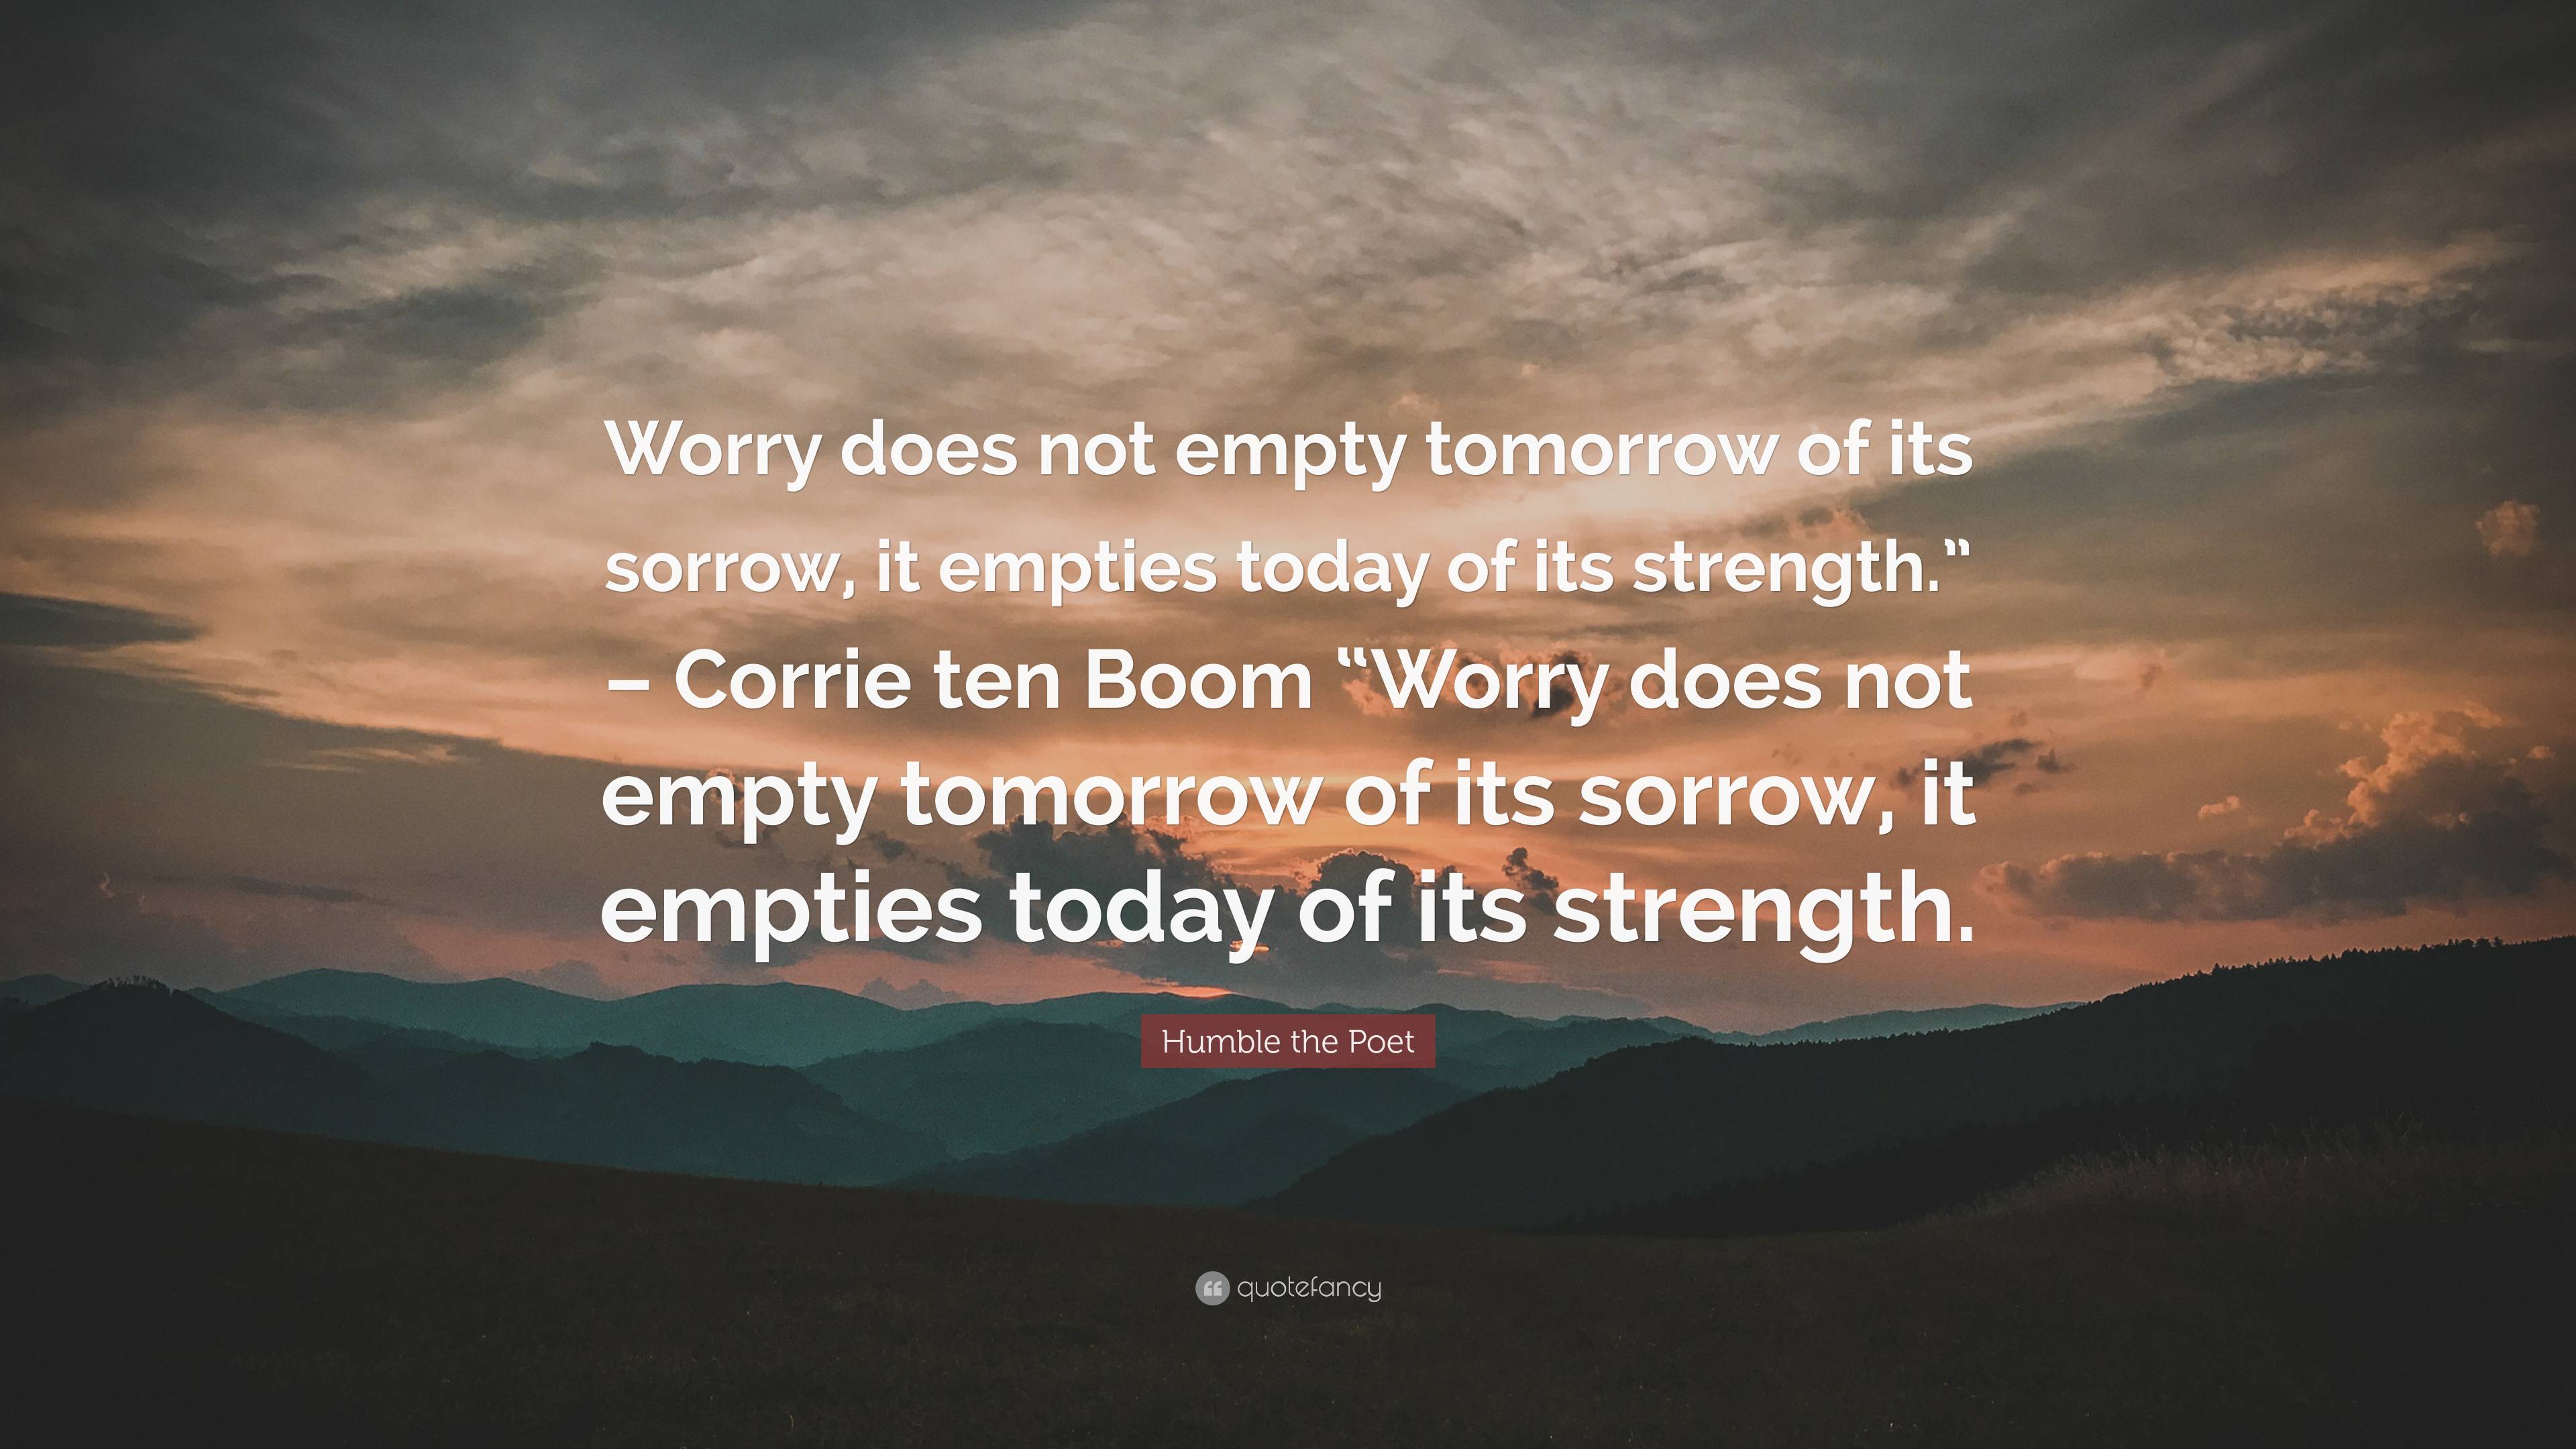 Humble the Poet Quote: “Worry does not empty tomorrow of its